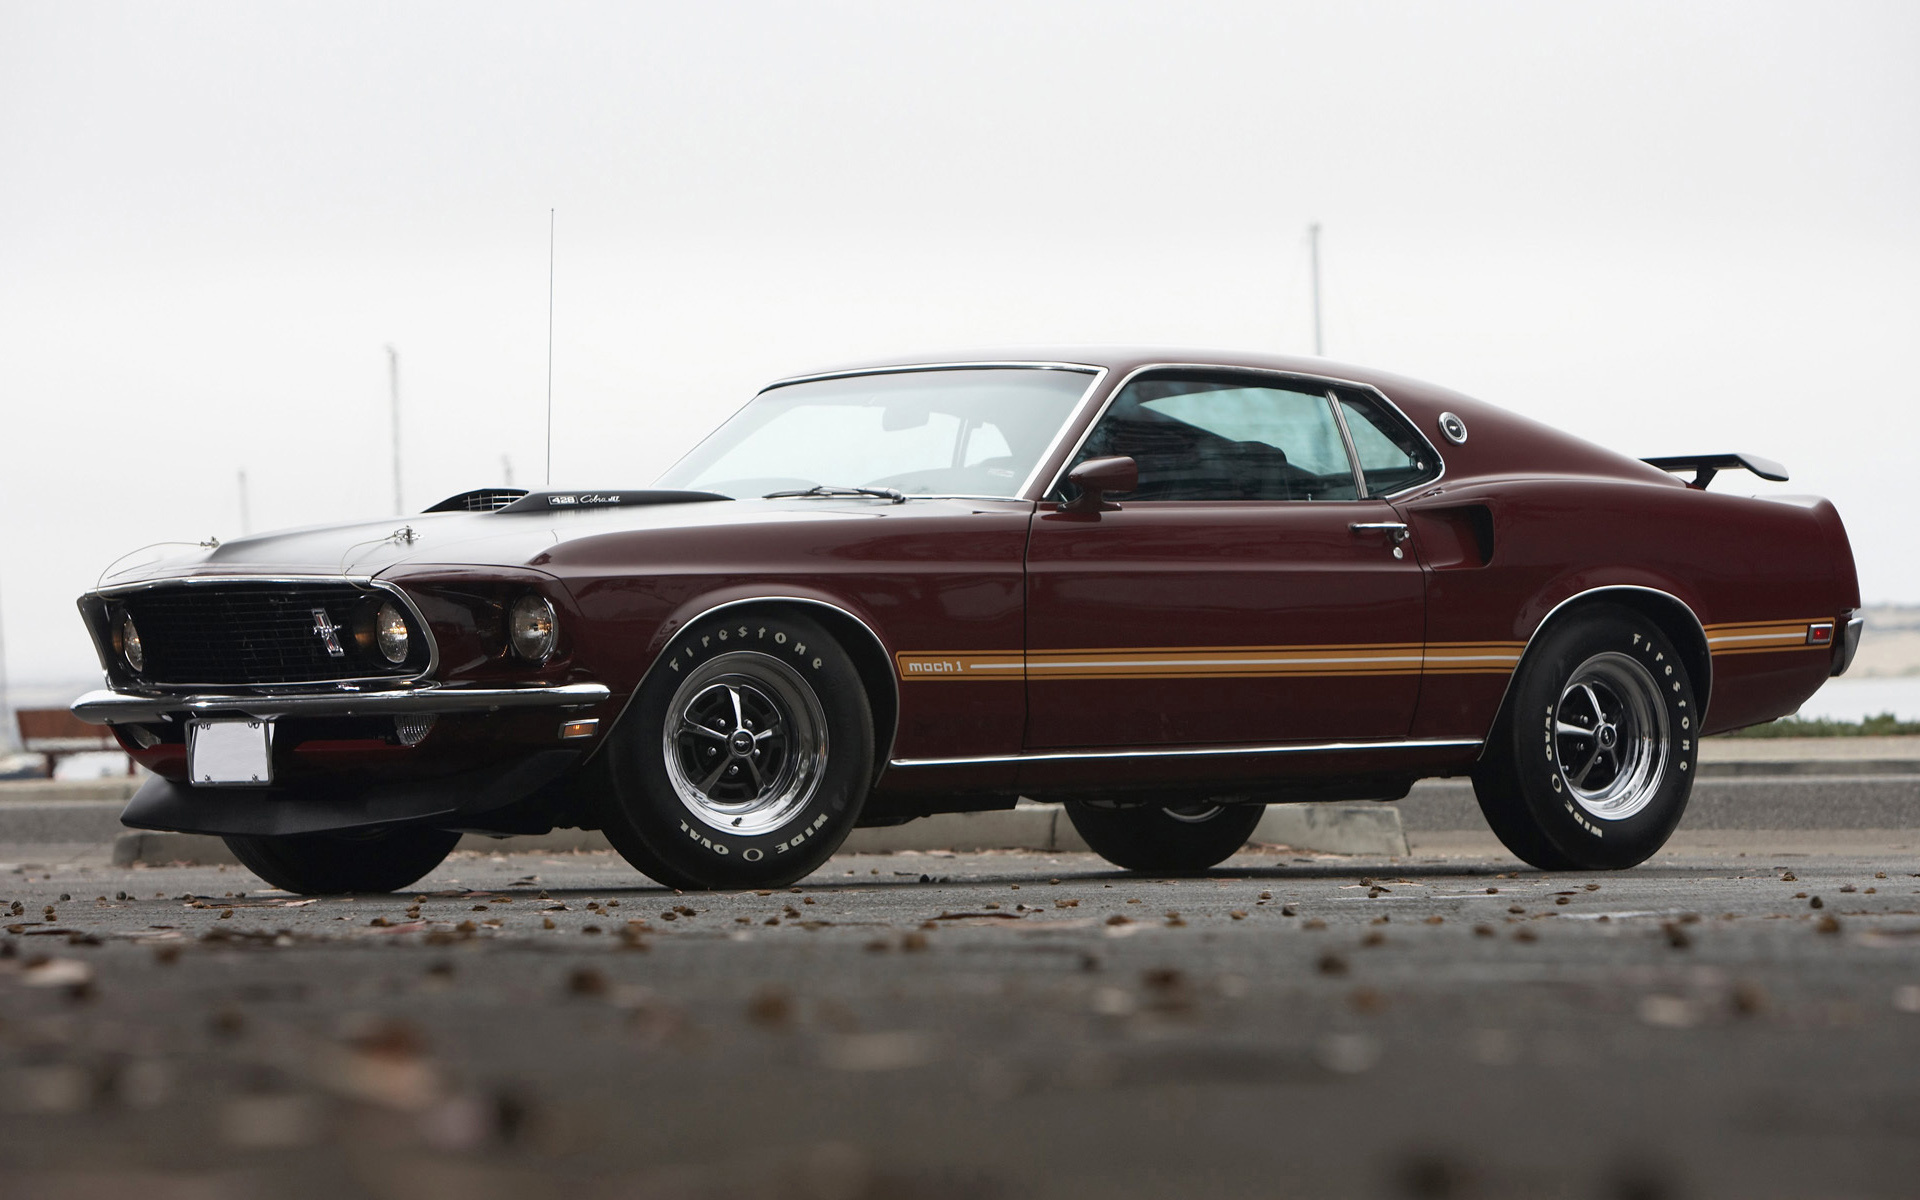 Ford Mustang Mach 1 Muscle Car 1920x1200